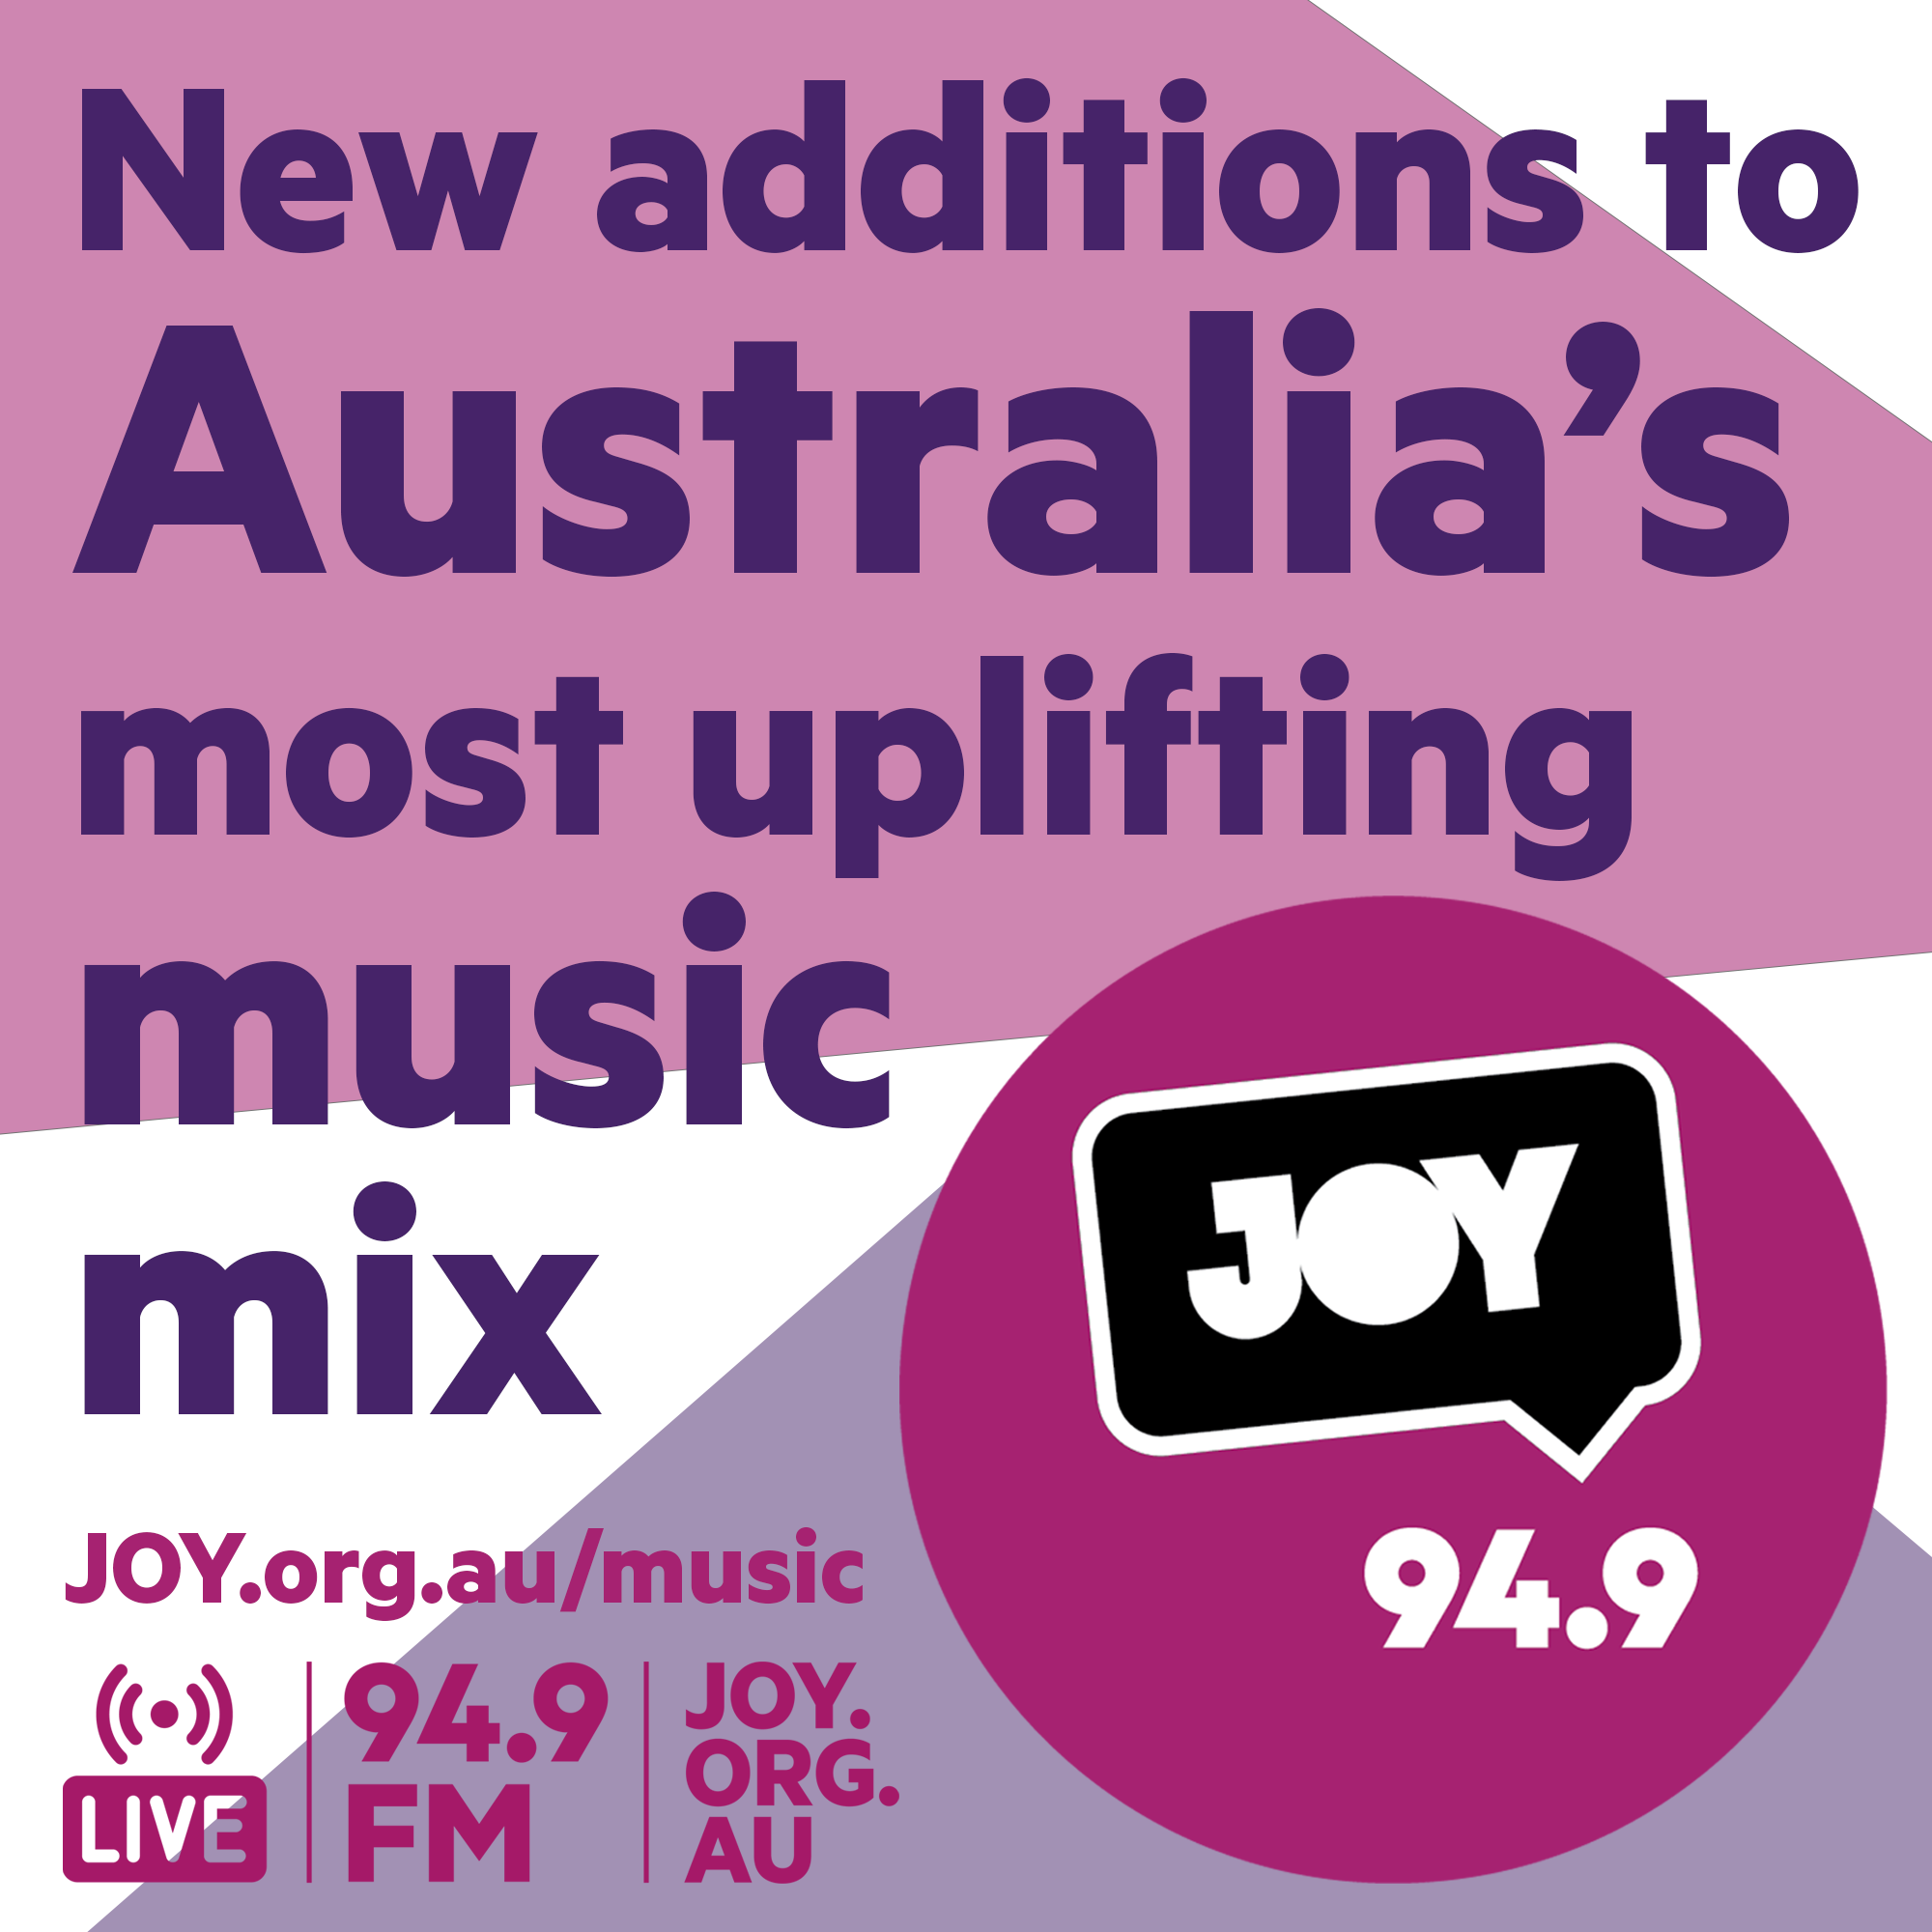 The newest songs to Australia’s most uplifting music mix: 30 March 2022